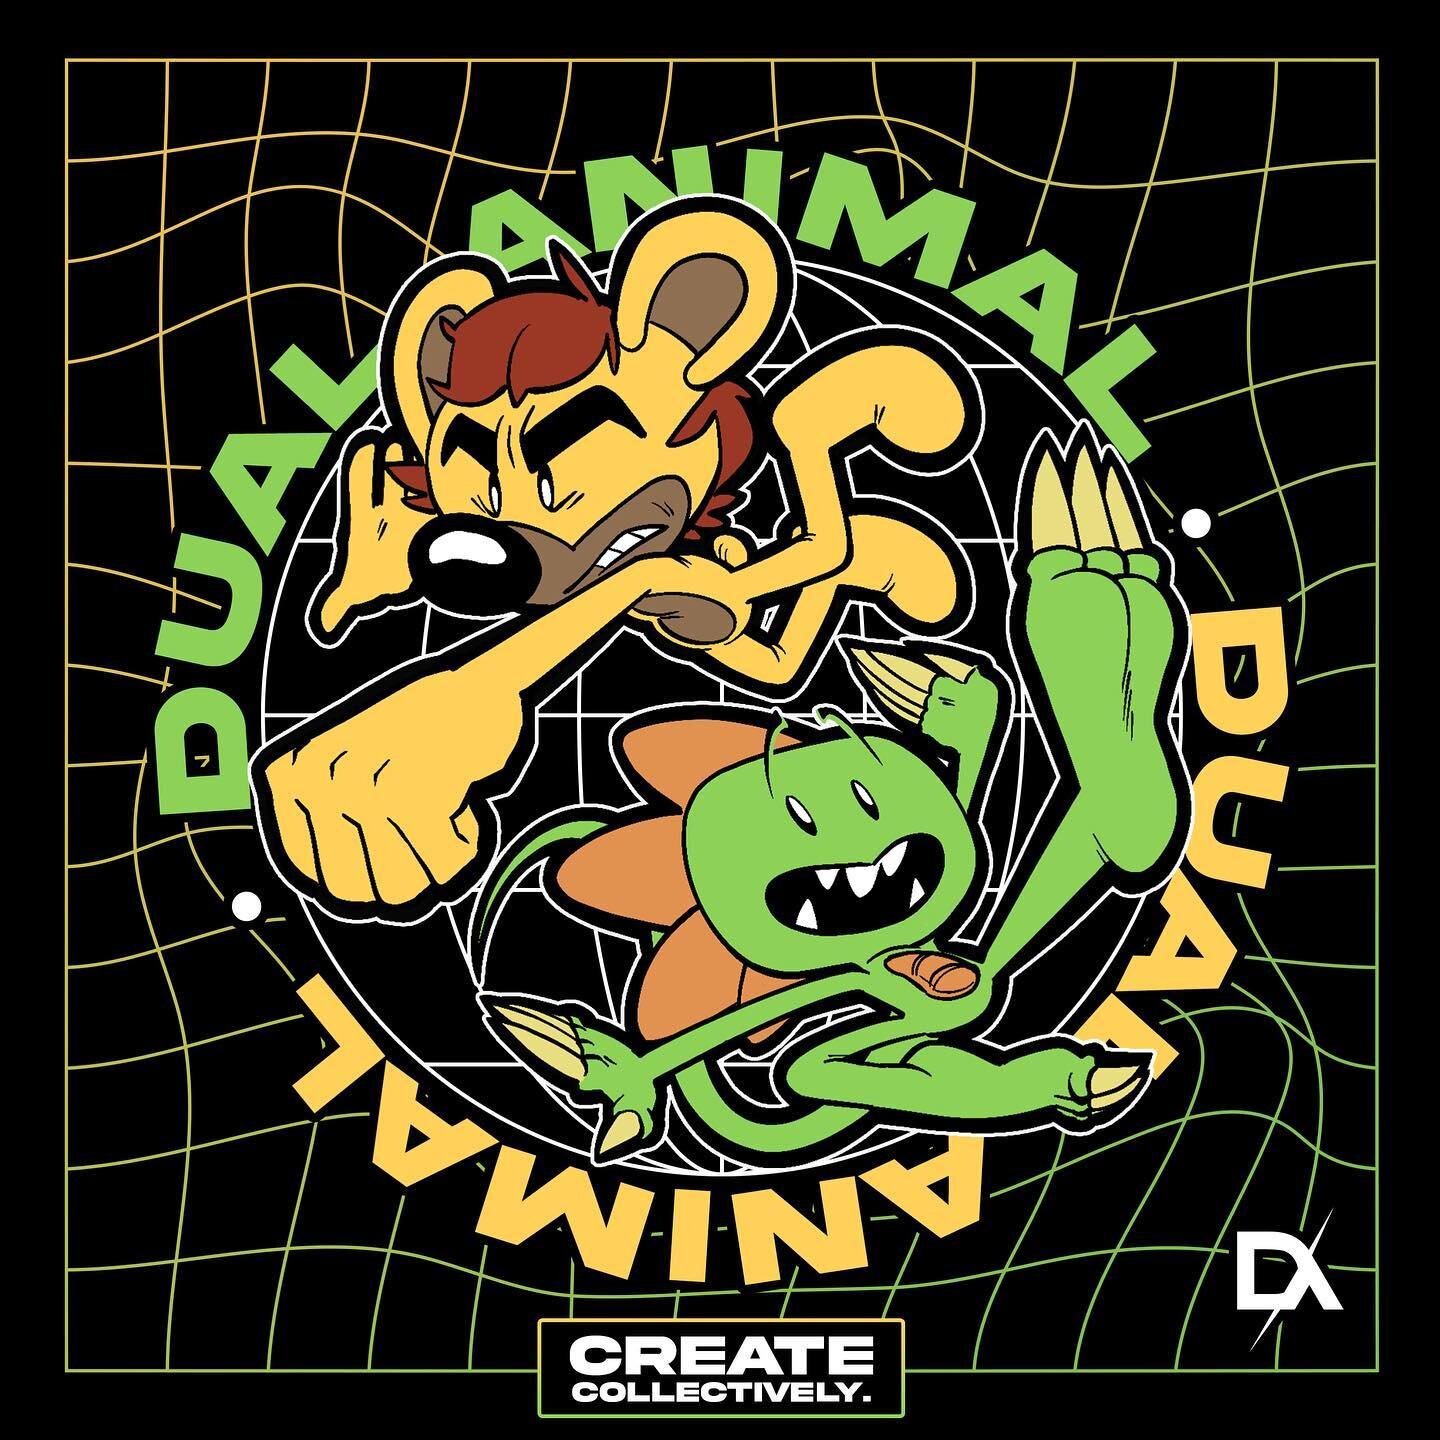 May divisions become bonds #CreateCollectively 🦁🐸
.
A little #ChuckAndMike promo piece for an upcoming *secret* thing. Art by Bobby Schwartz.
.
UPDATE: Dual Animal: Issue Zero can still be read for FREE at dualanimal.com up until June 14th! After t